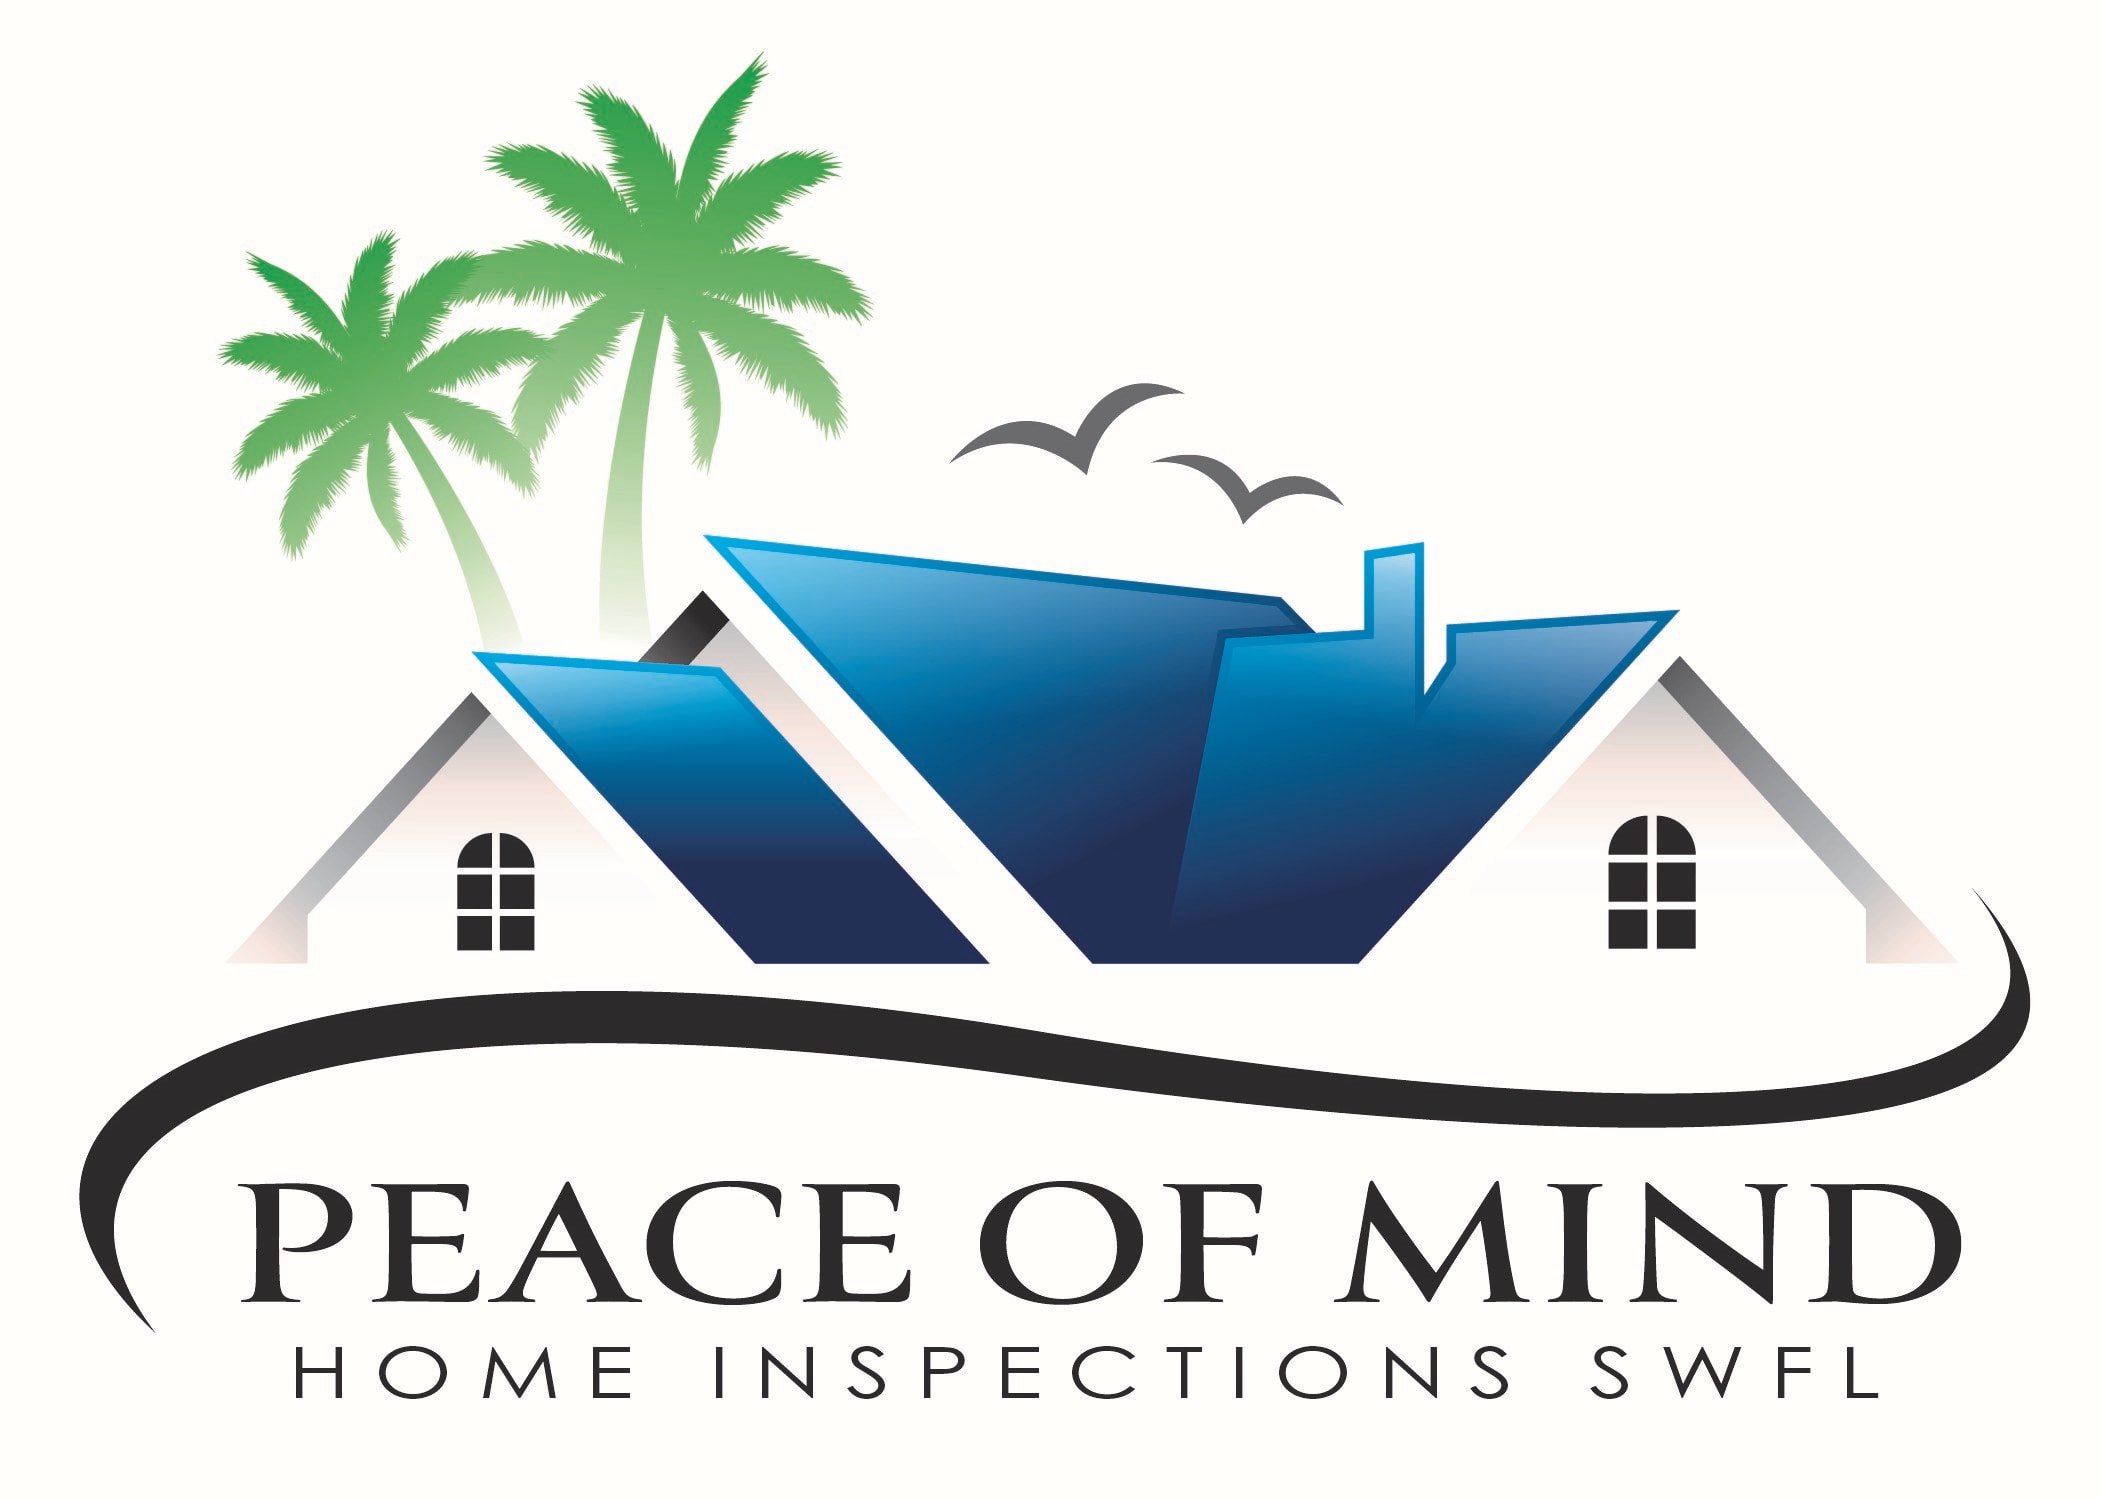 PEACE OF MIND HOME INSPECTIONS SWFL, LLC Logo